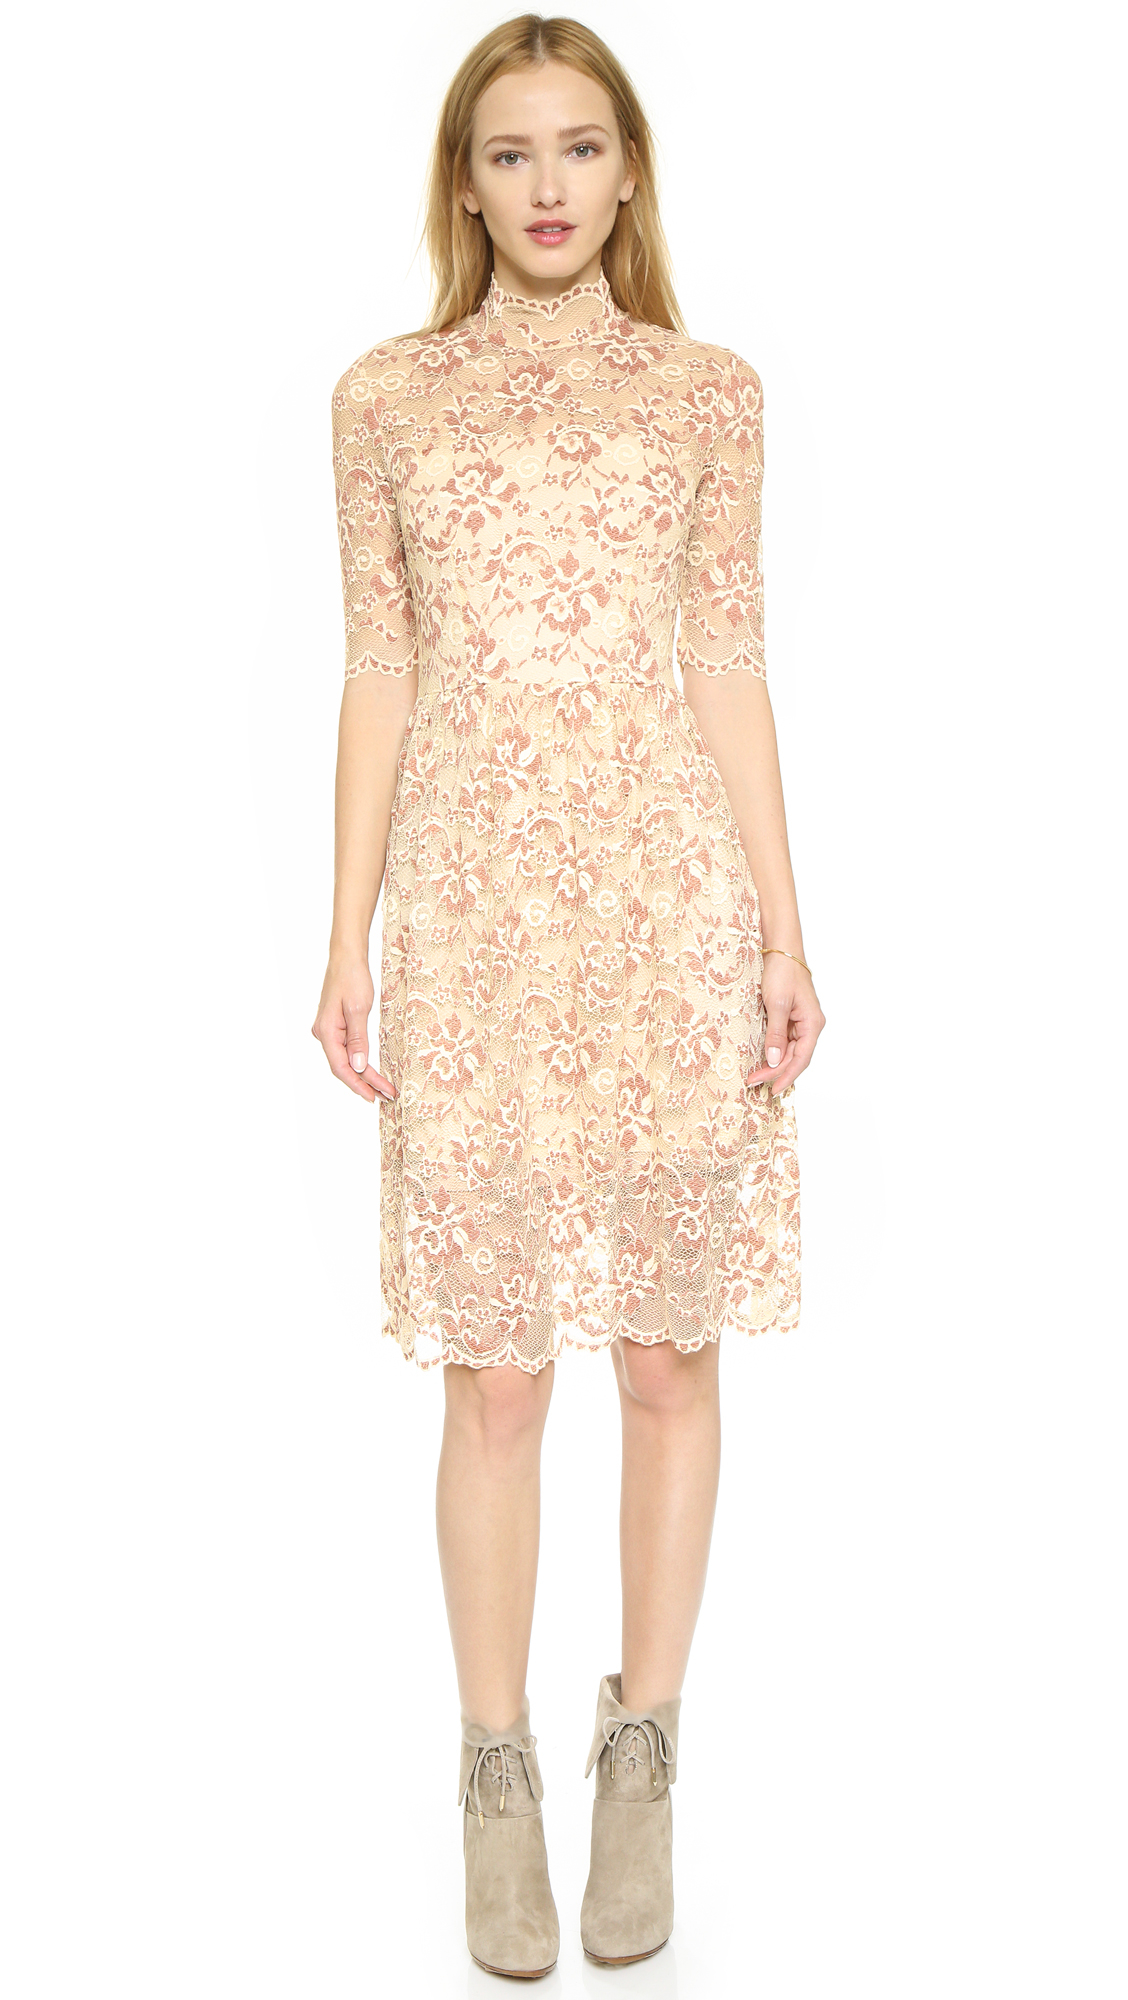 Ganni Adelaide Turtleneck Lace Dress in White Smoke/Copper Brown (Natural)  - Lyst